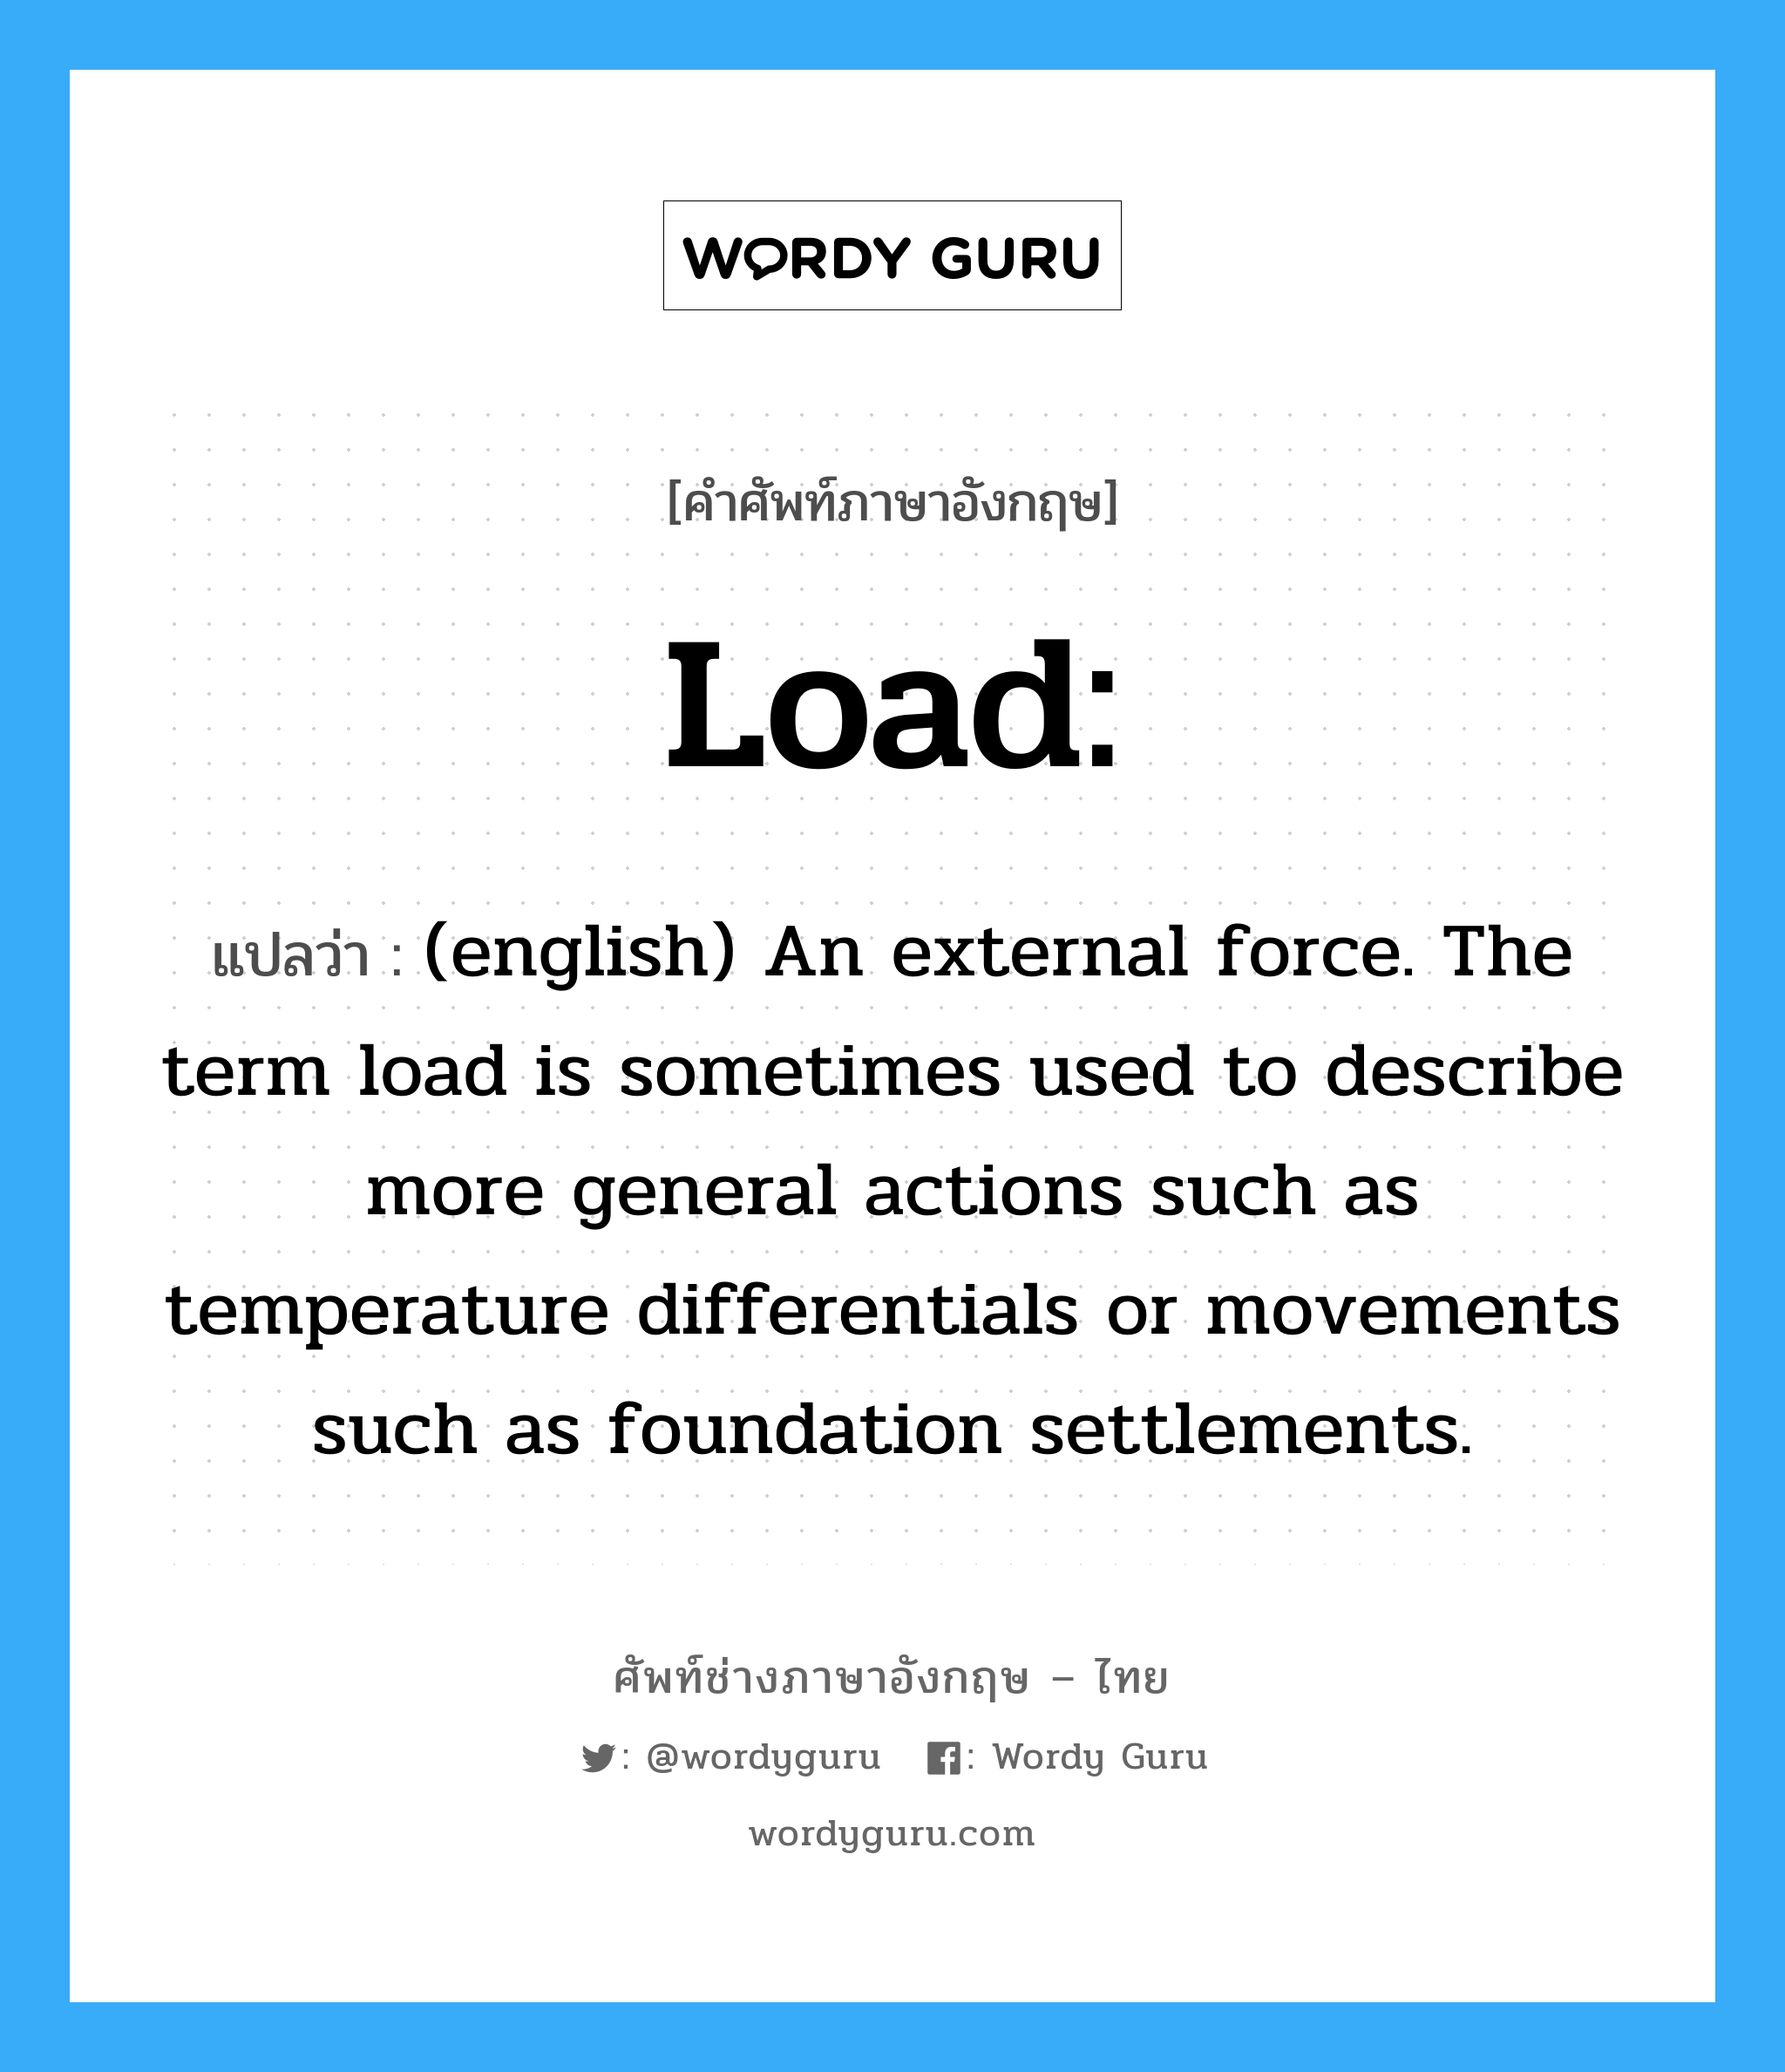 Load: แปลว่า?, คำศัพท์ช่างภาษาอังกฤษ - ไทย Load: คำศัพท์ภาษาอังกฤษ Load: แปลว่า (english) An external force. The term load is sometimes used to describe more general actions such as temperature differentials or movements such as foundation settlements.